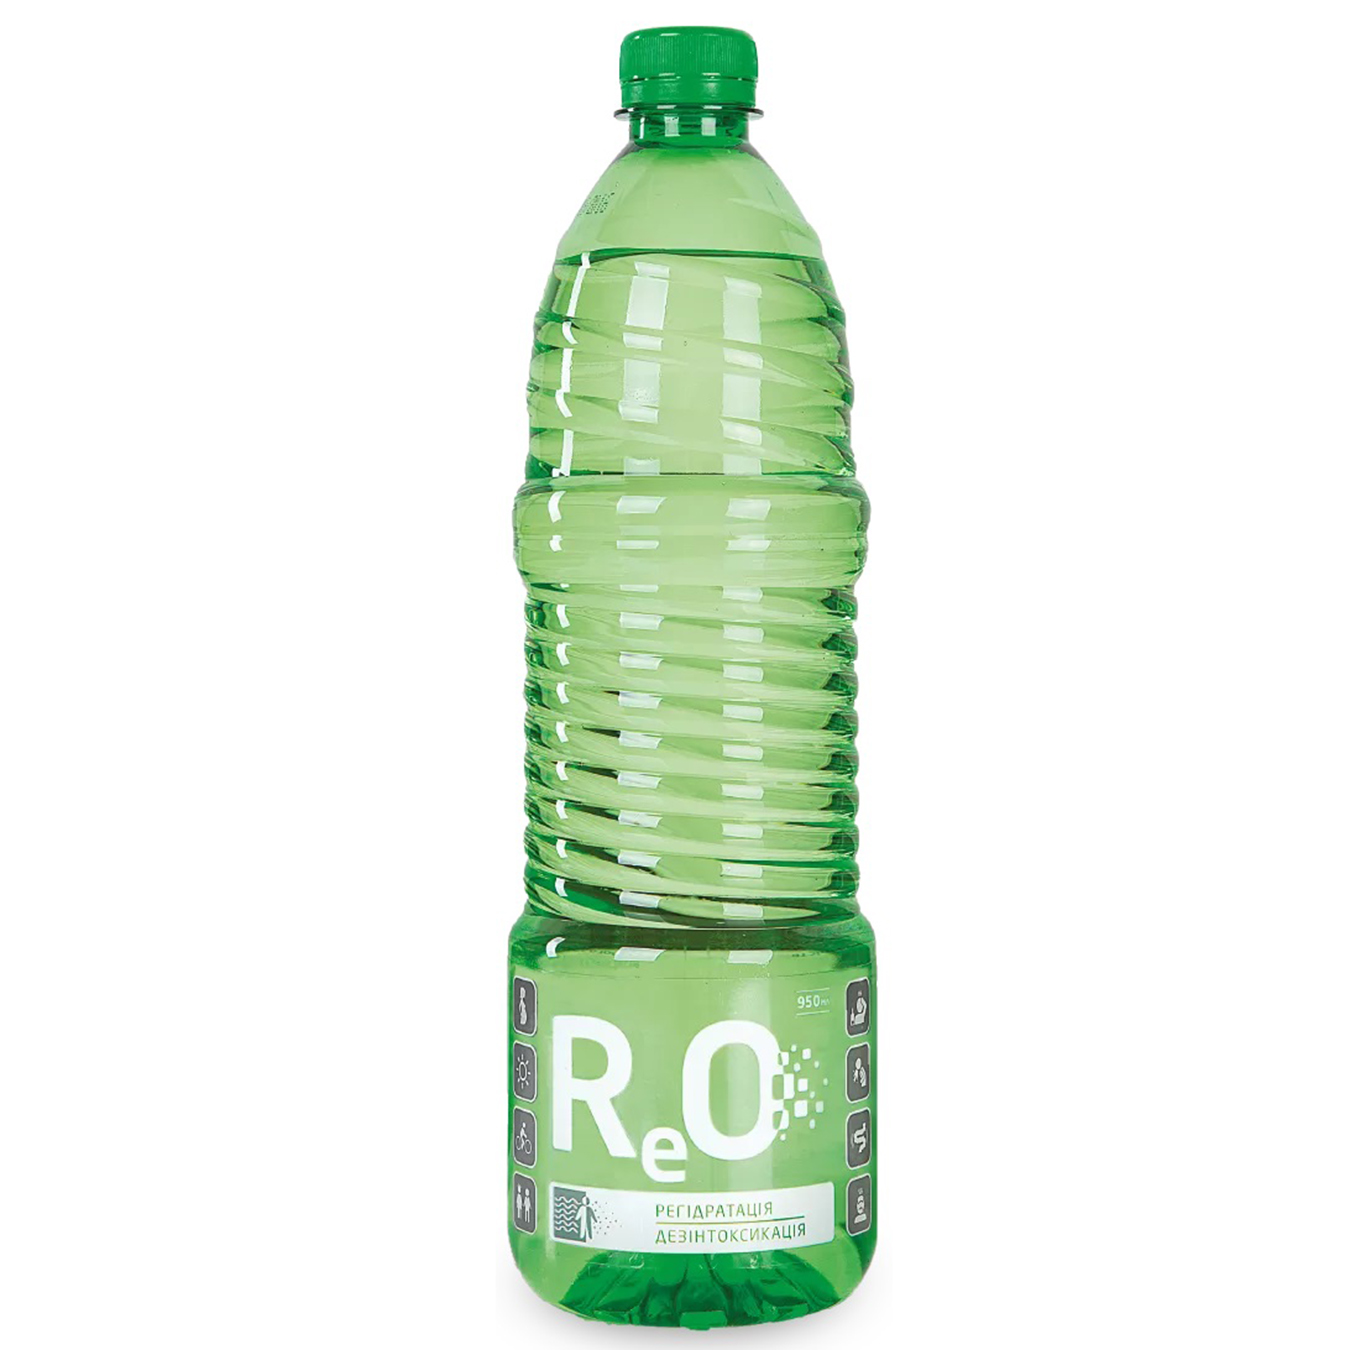 ReO mineral water lightly carbonated 0.95 l